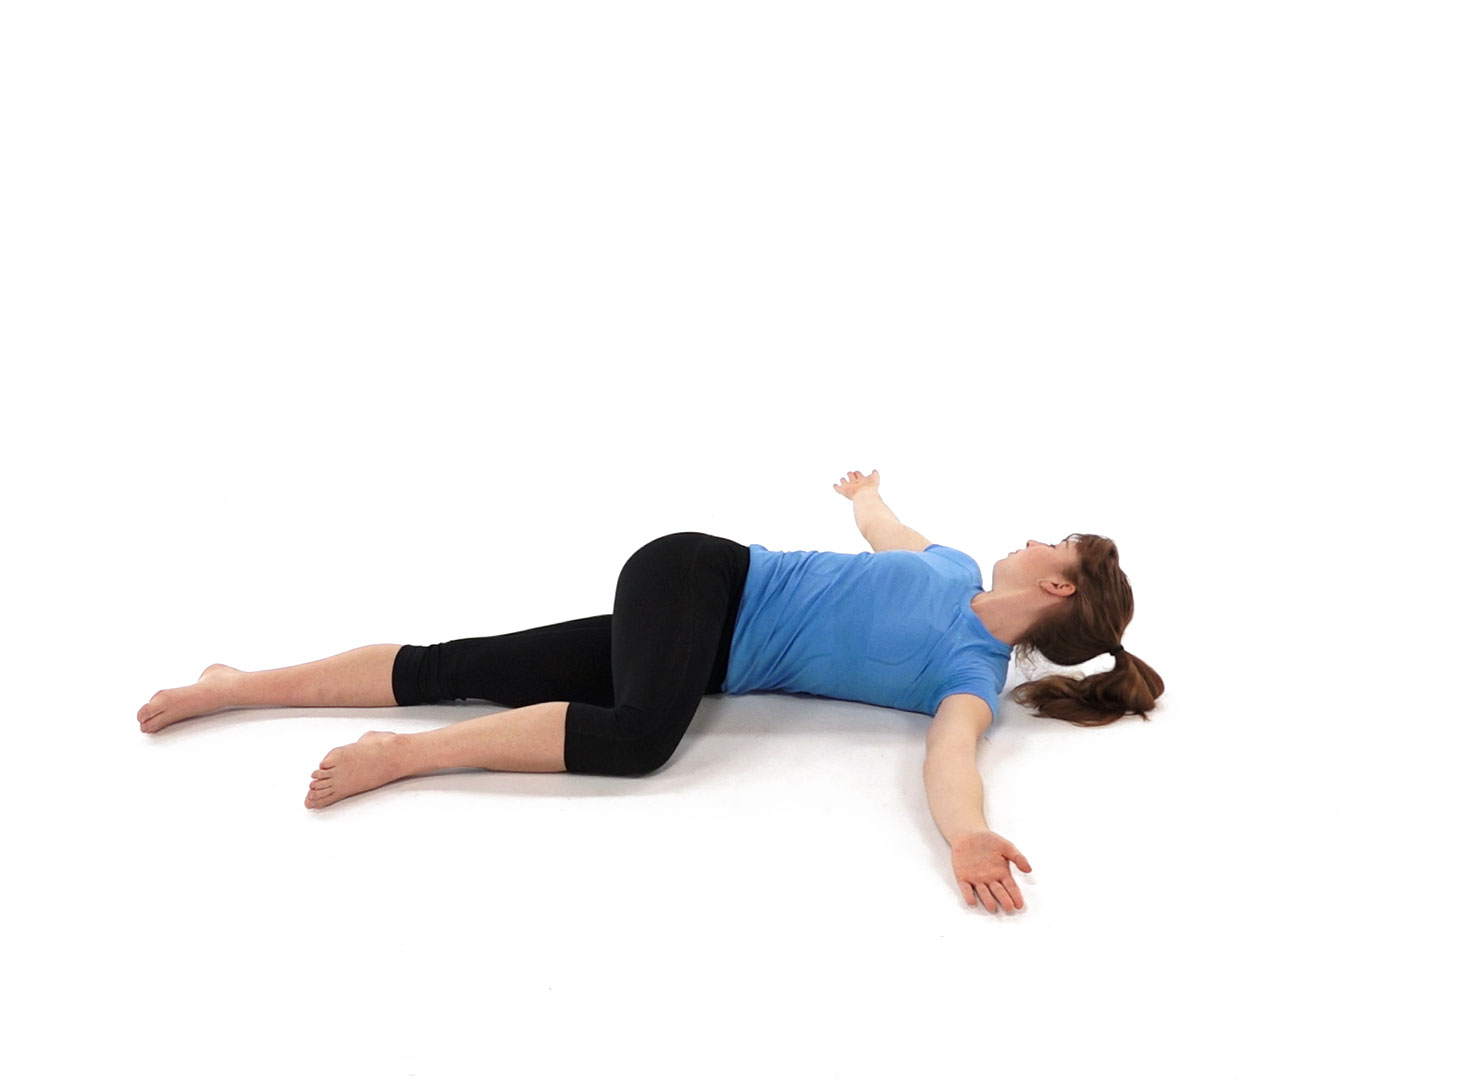 Supine chest opening stretch - feel great in between yoga or